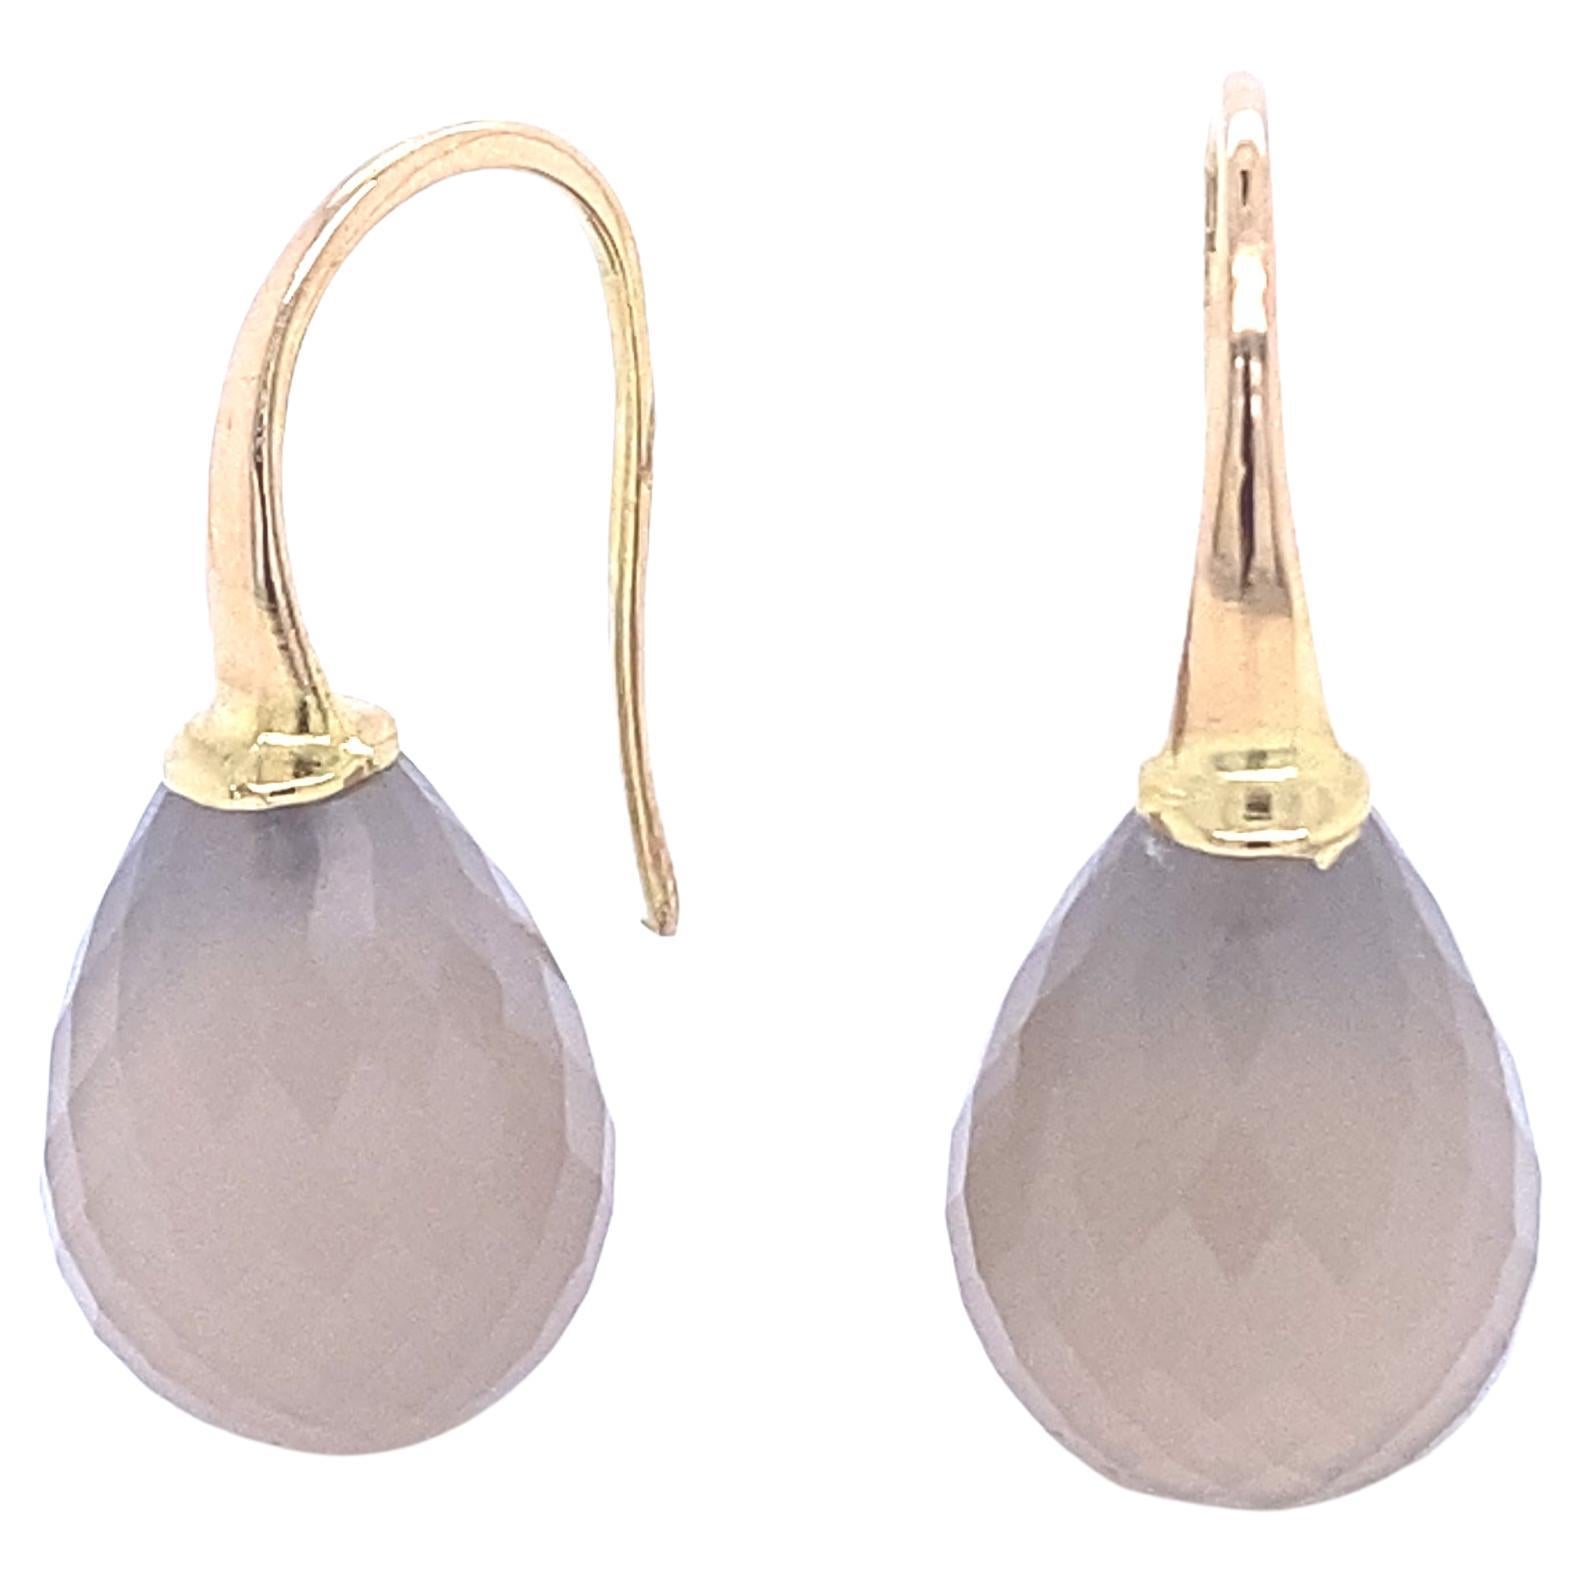 Discover these magnificent 18-carat yellow gold dangling earrings, adorned with gray agates, from the French collection of Mesure et Art du Temps. These earrings are a true jewel of elegance and sophistication, bringing a touch of brilliance and